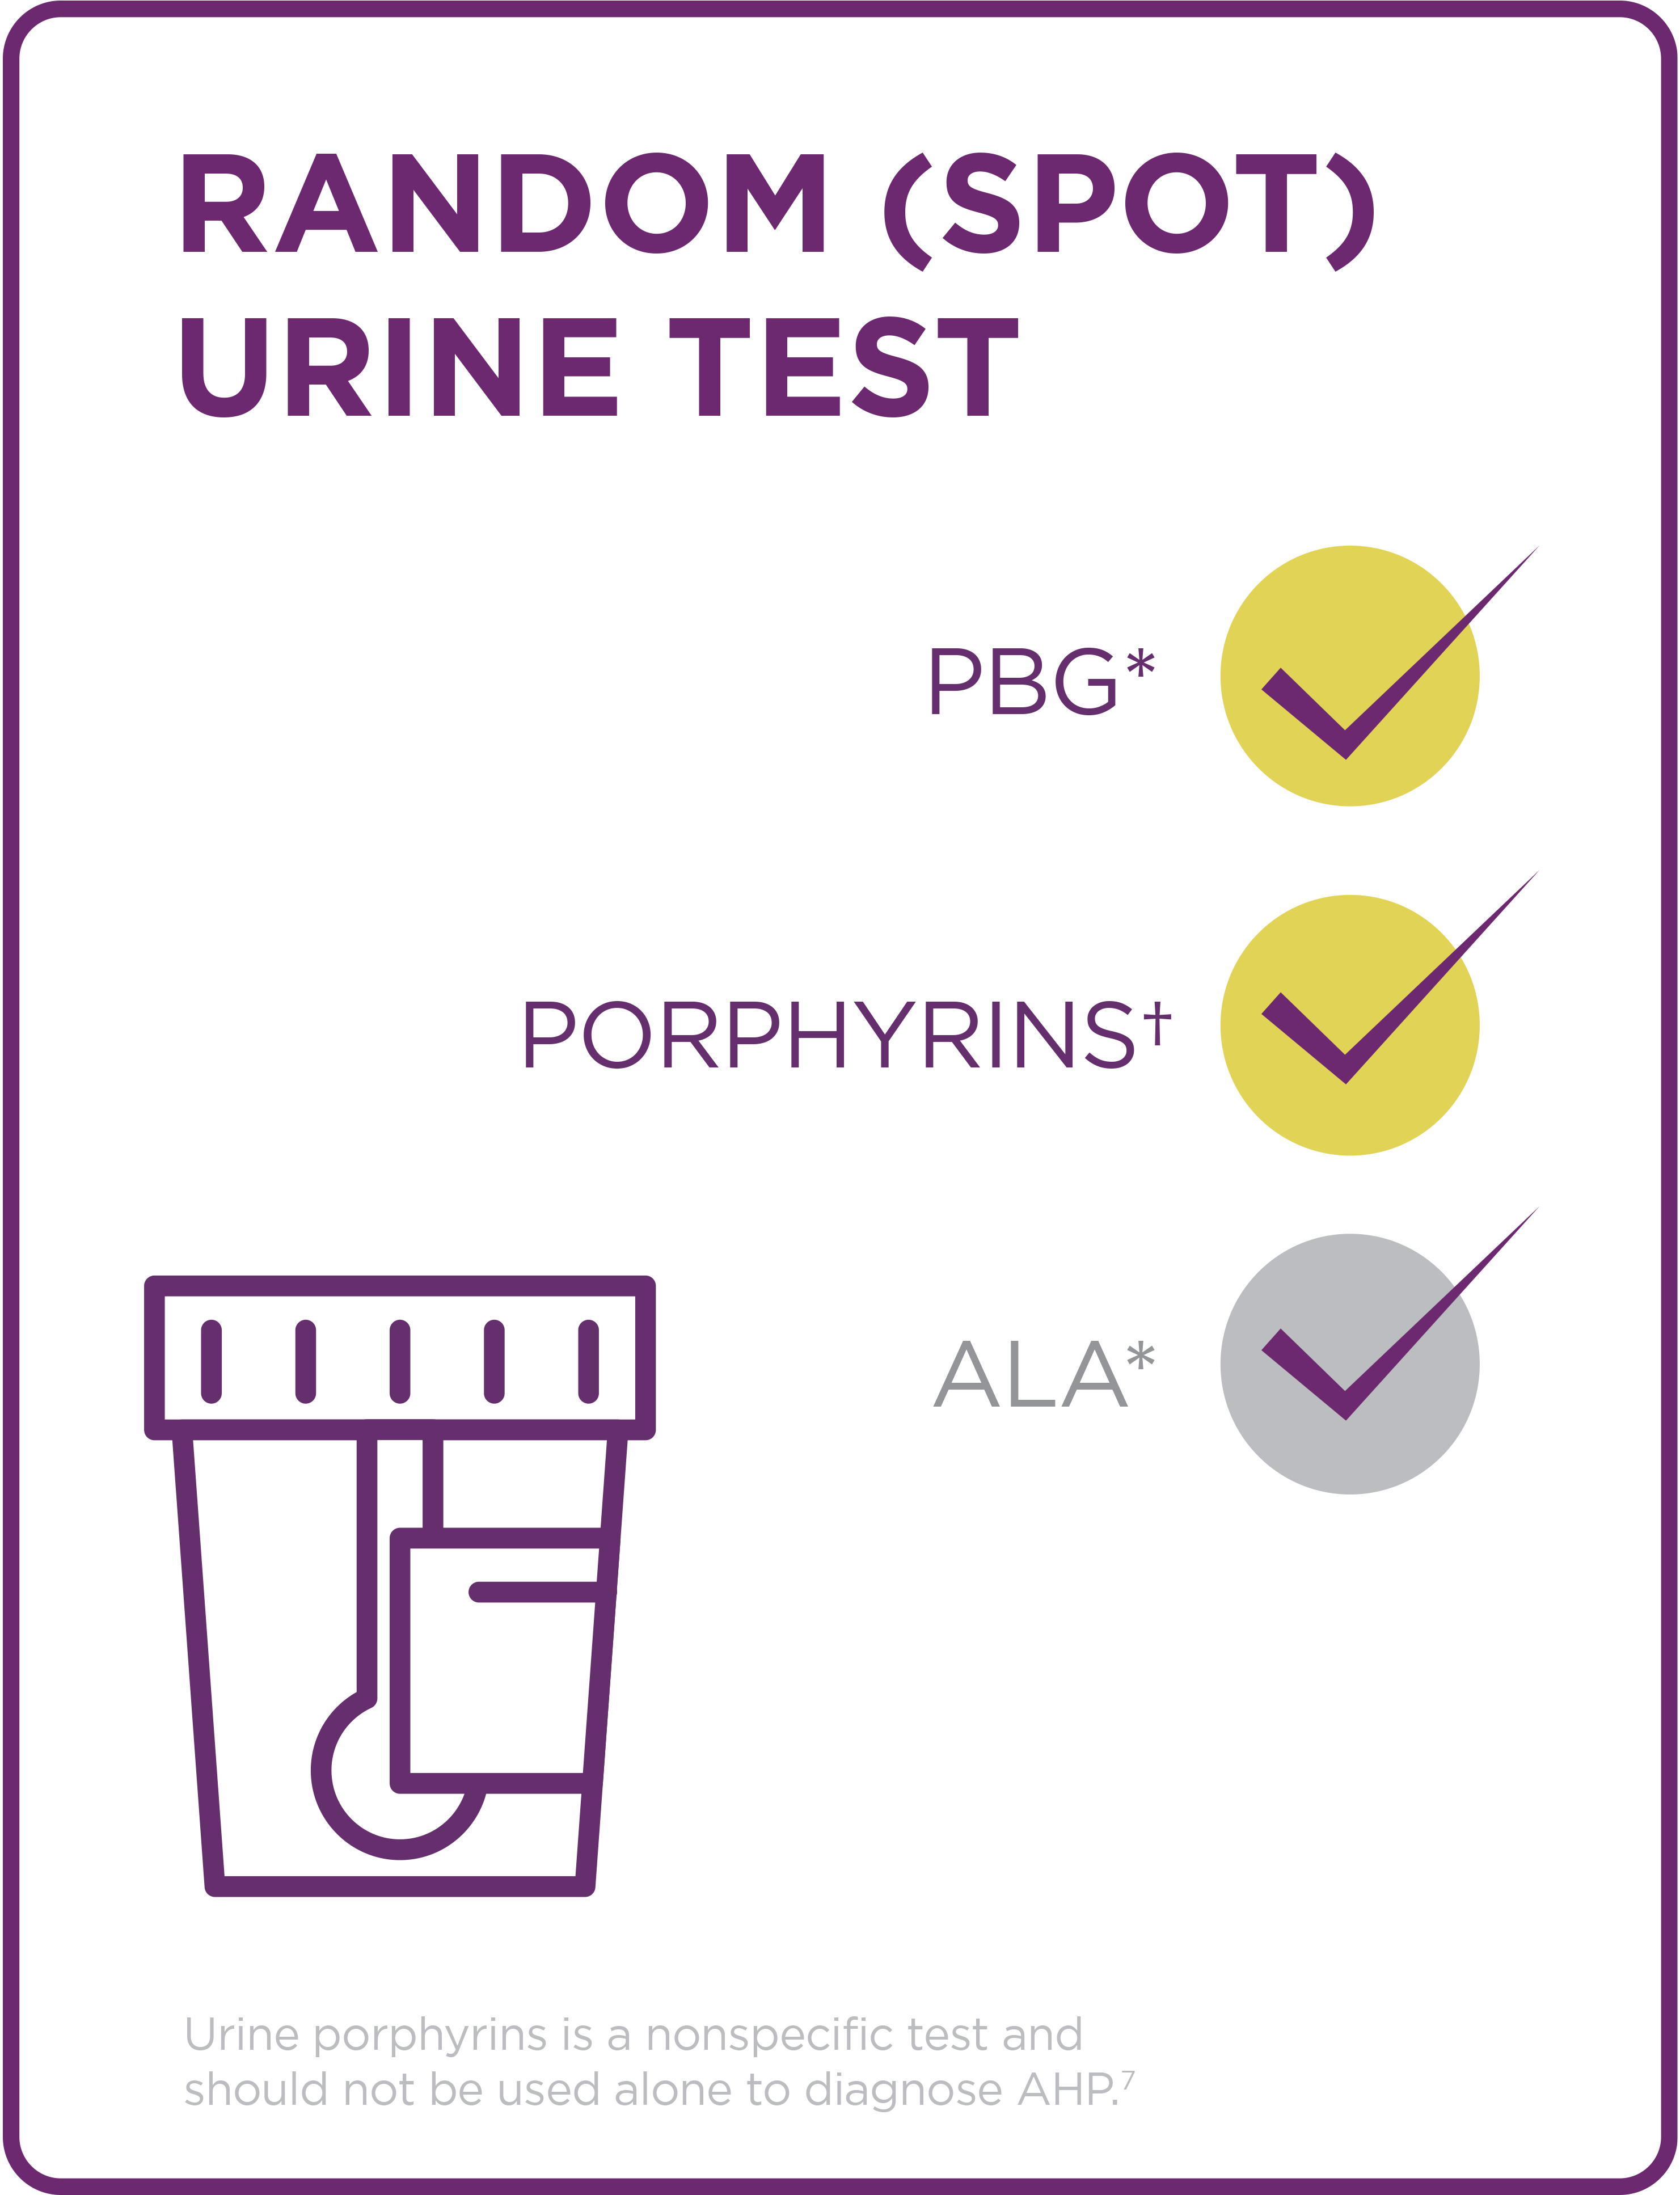 Urine tests and genetic confirmation